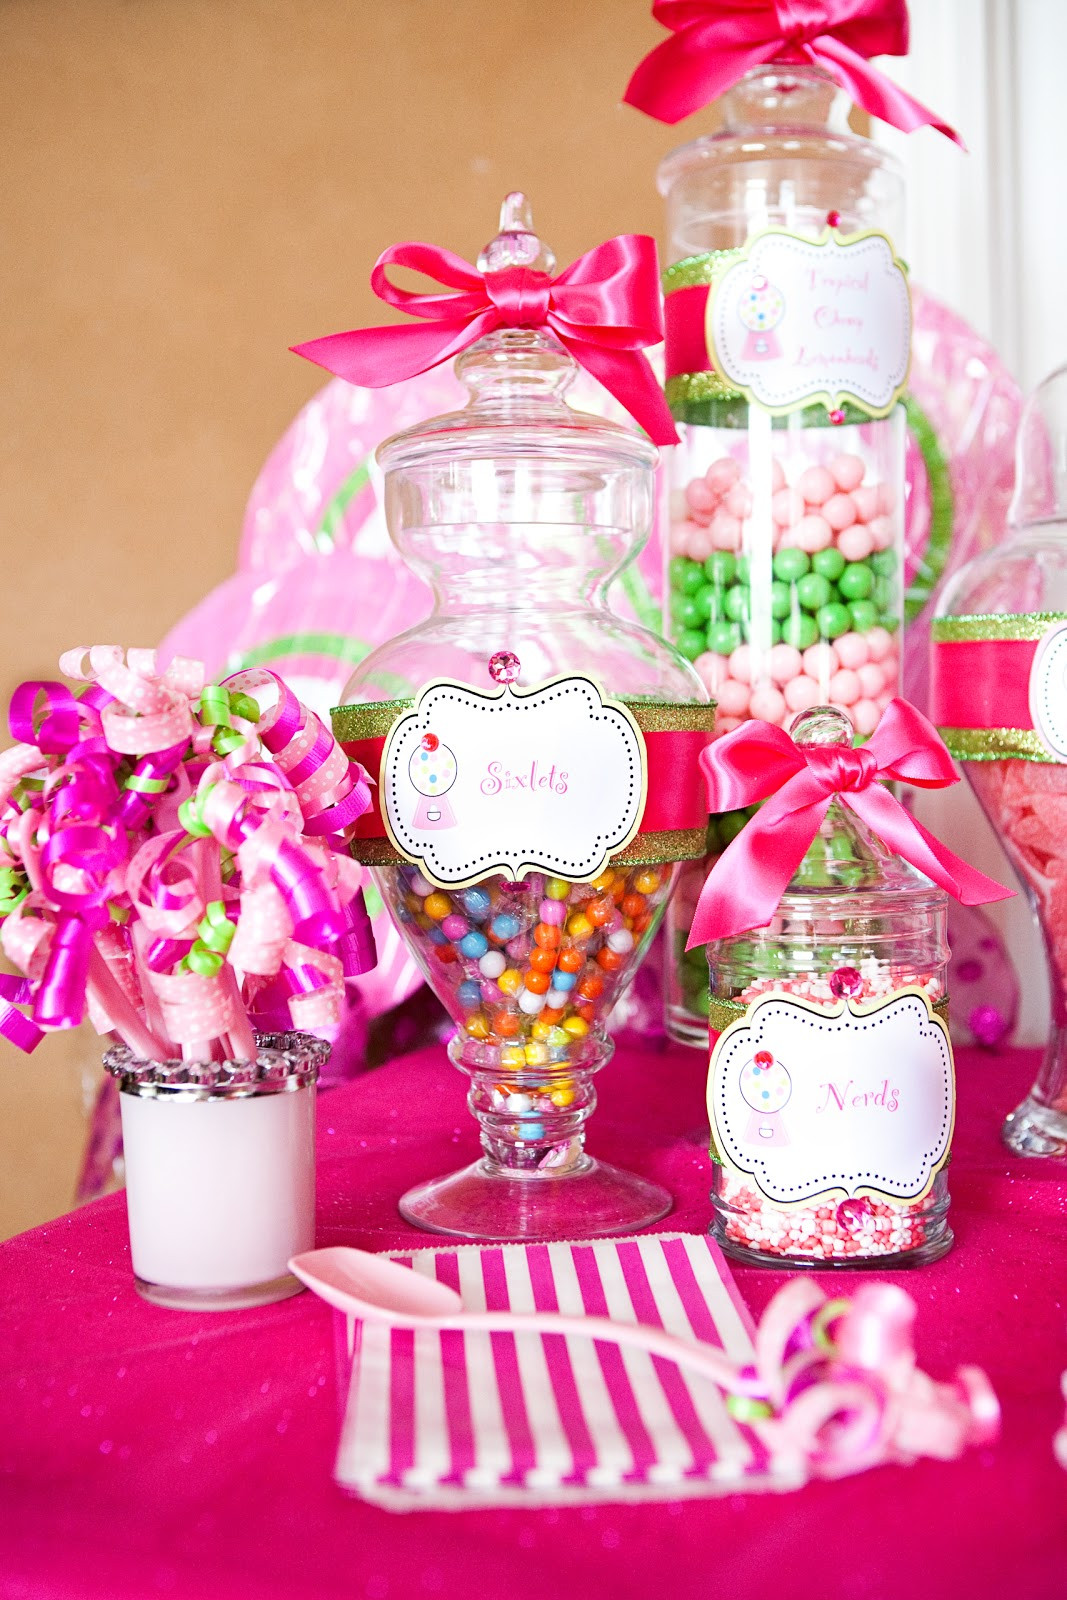 Birthday Decorations For Girls
 The TomKat Studio Sweet Customers Pink Sweet Shoppe